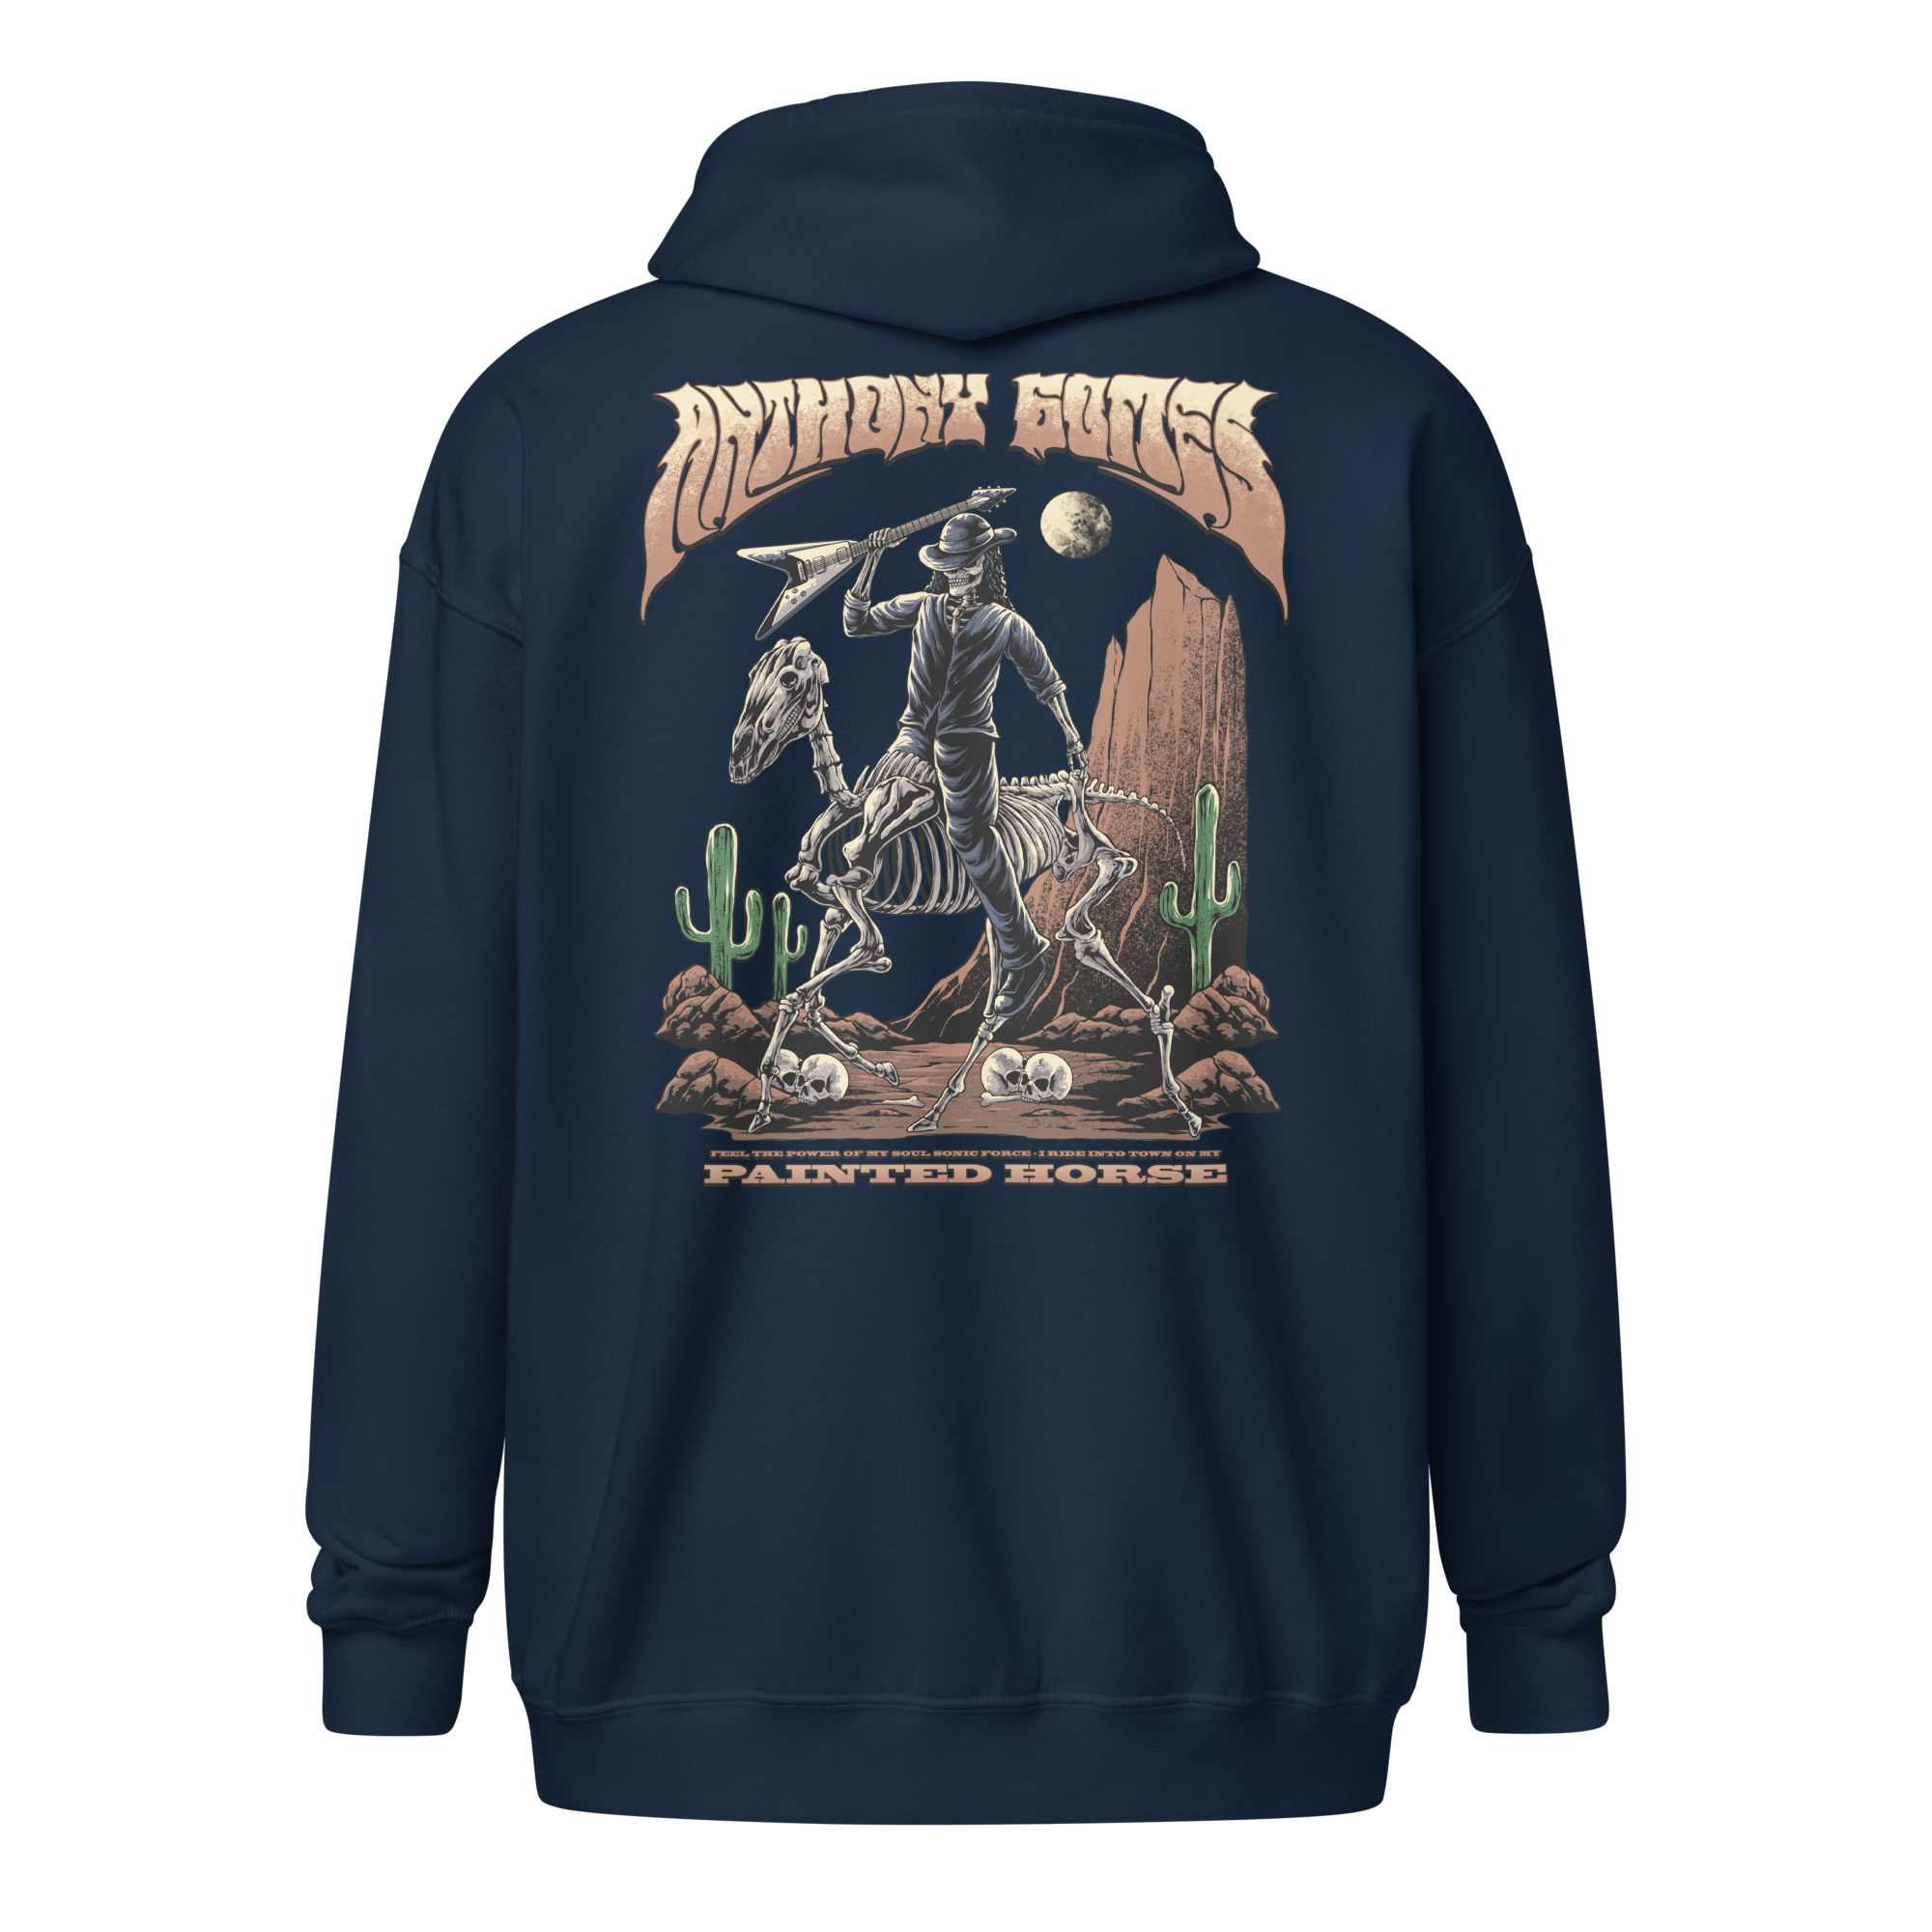 Painted Horse Unisex Hoodie - Available in 3 Colors (S-5XL)